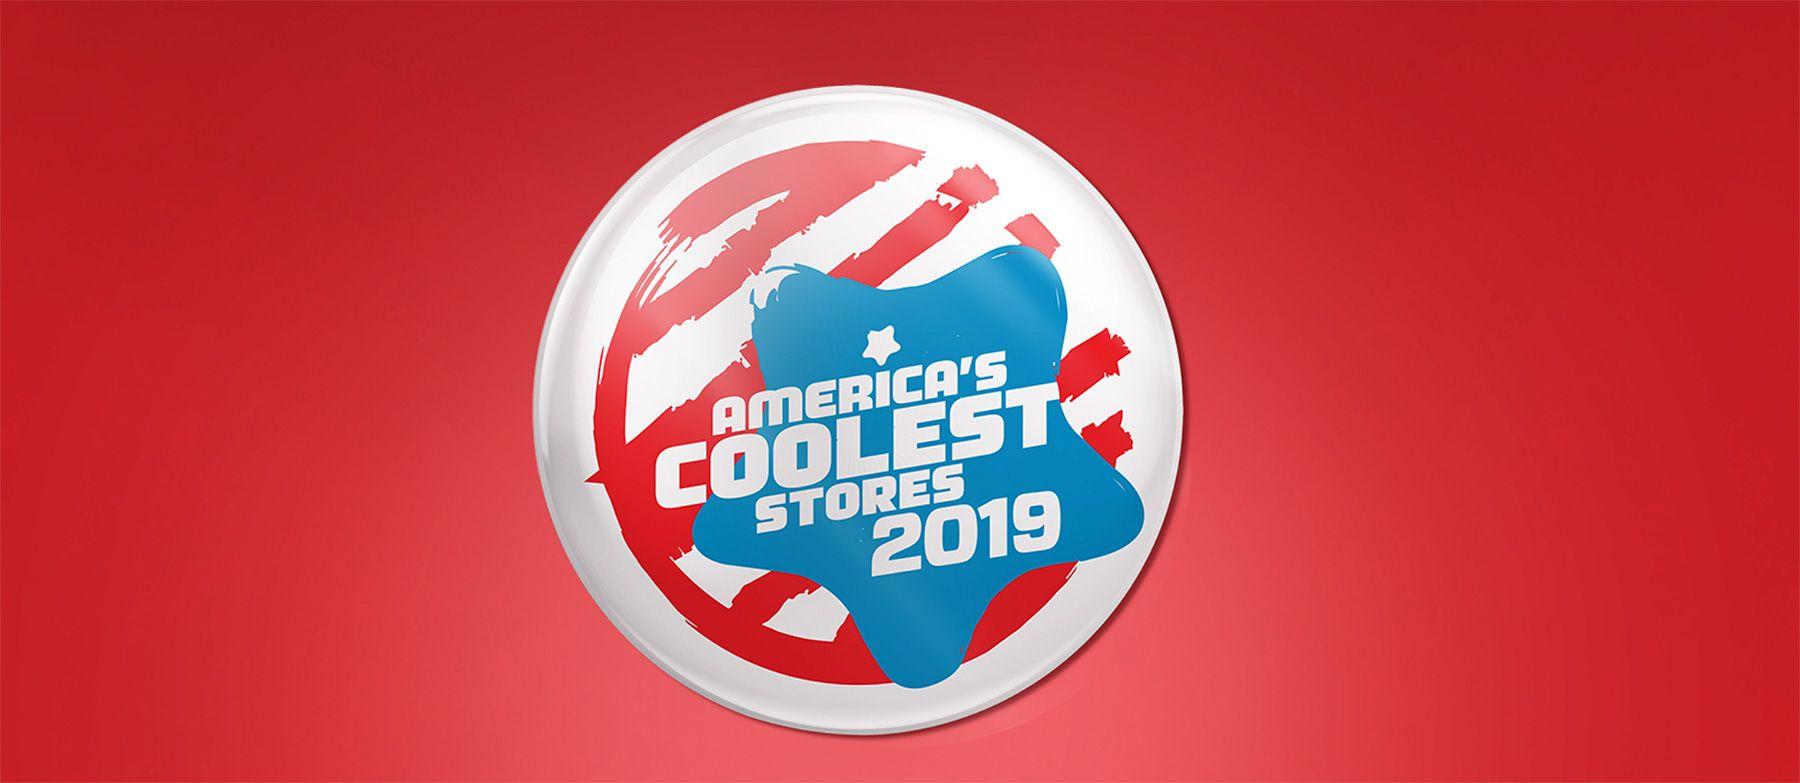 American Retailer Red S Logo - America's Coolest Stores: Get Your Contest Entry in Great Shape ...